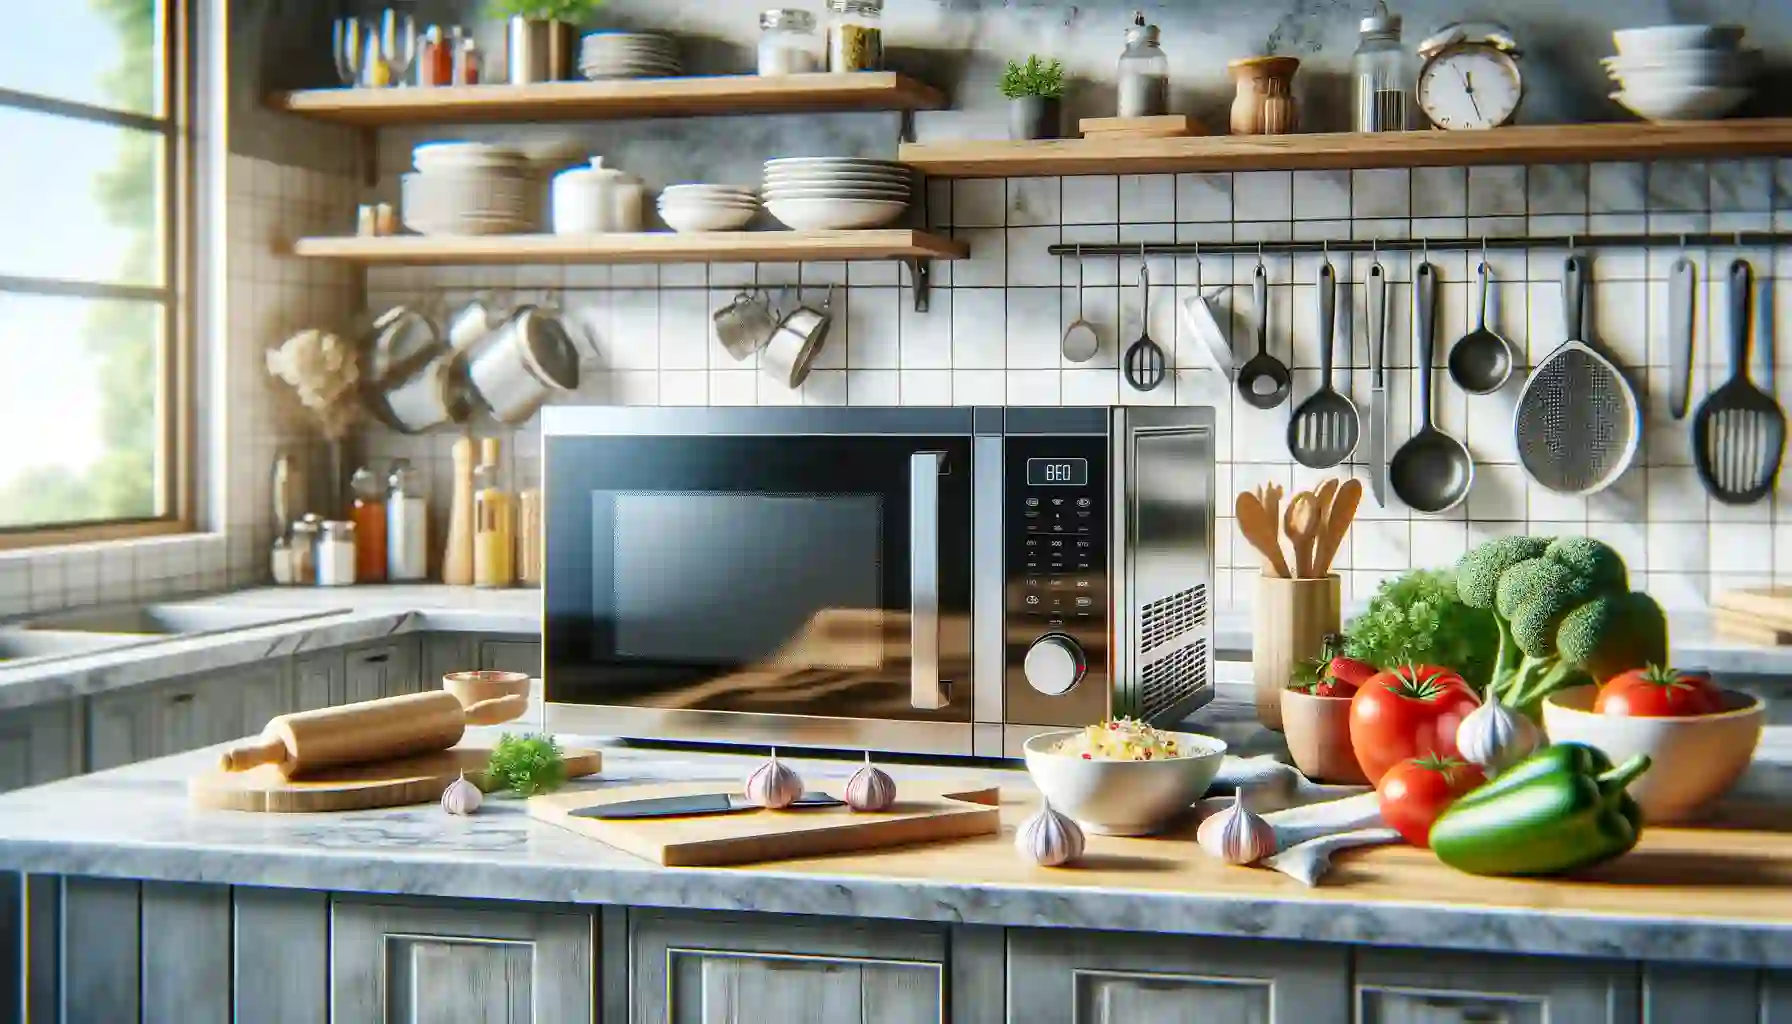 Microwave Oven prominently displayed on the countertop, surrounded by various cooking ingredients